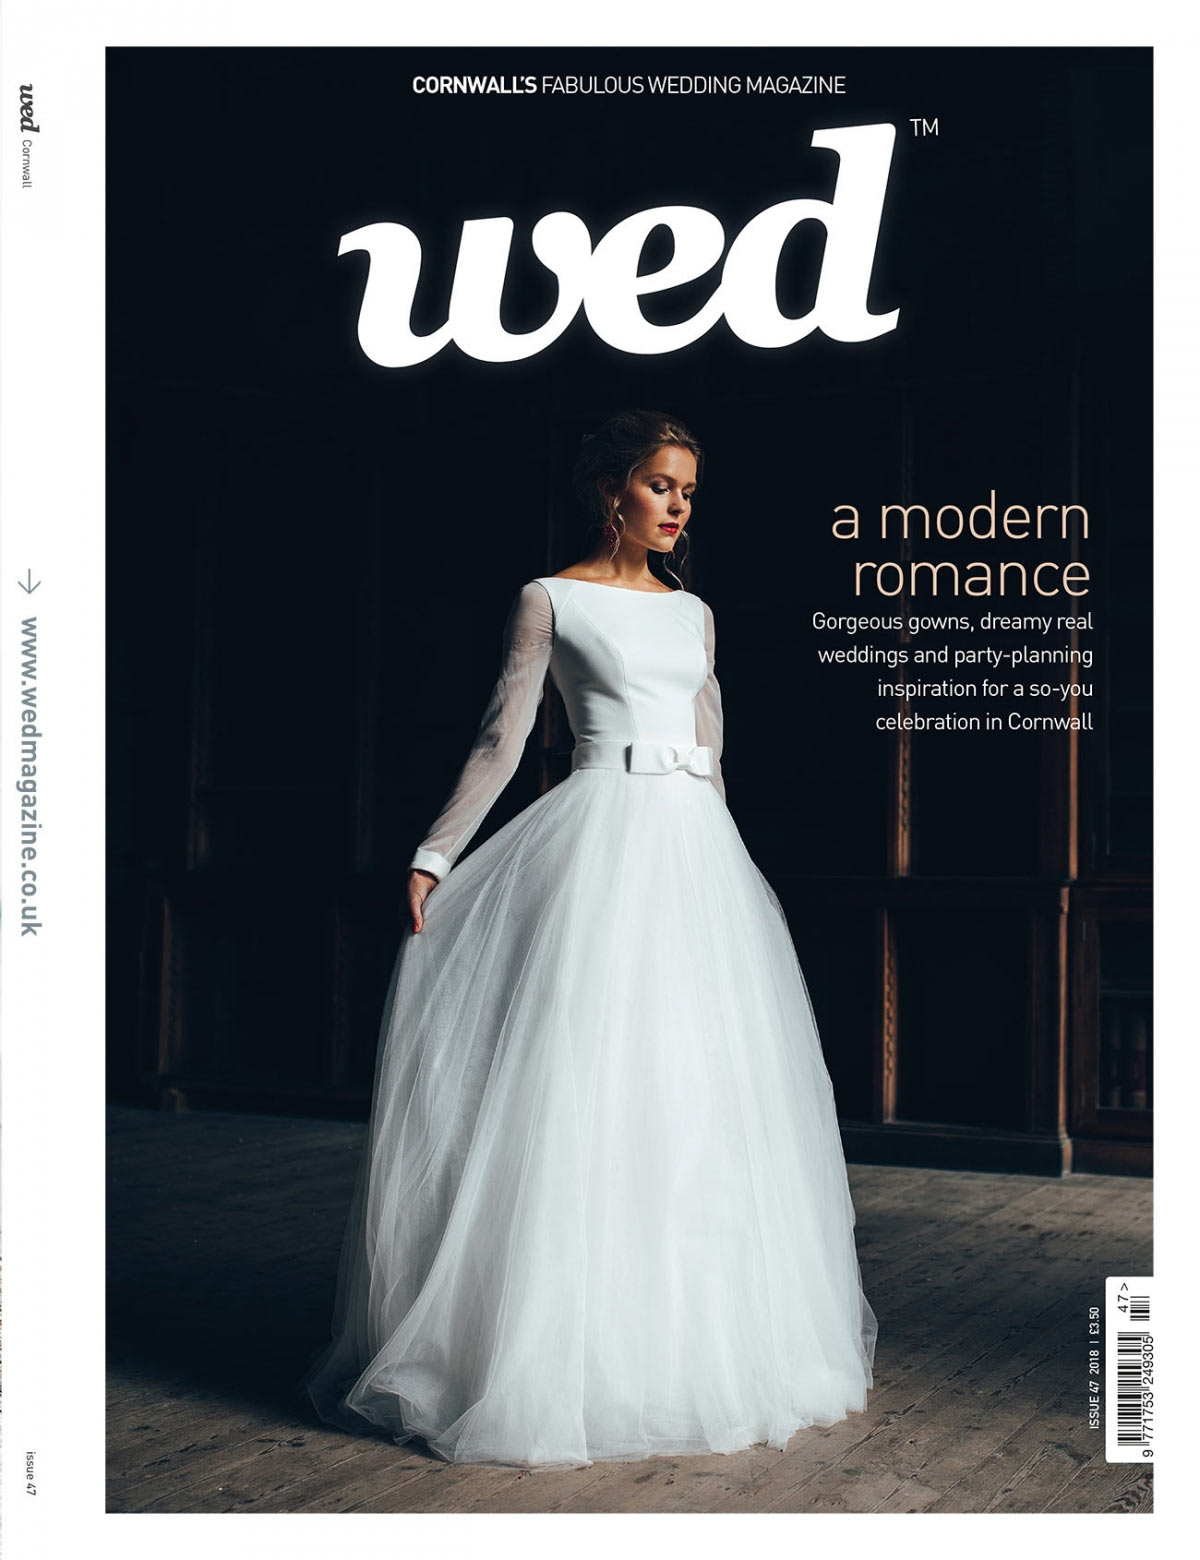 Order your copy of Cornwall's fabulous wedding magazine here!